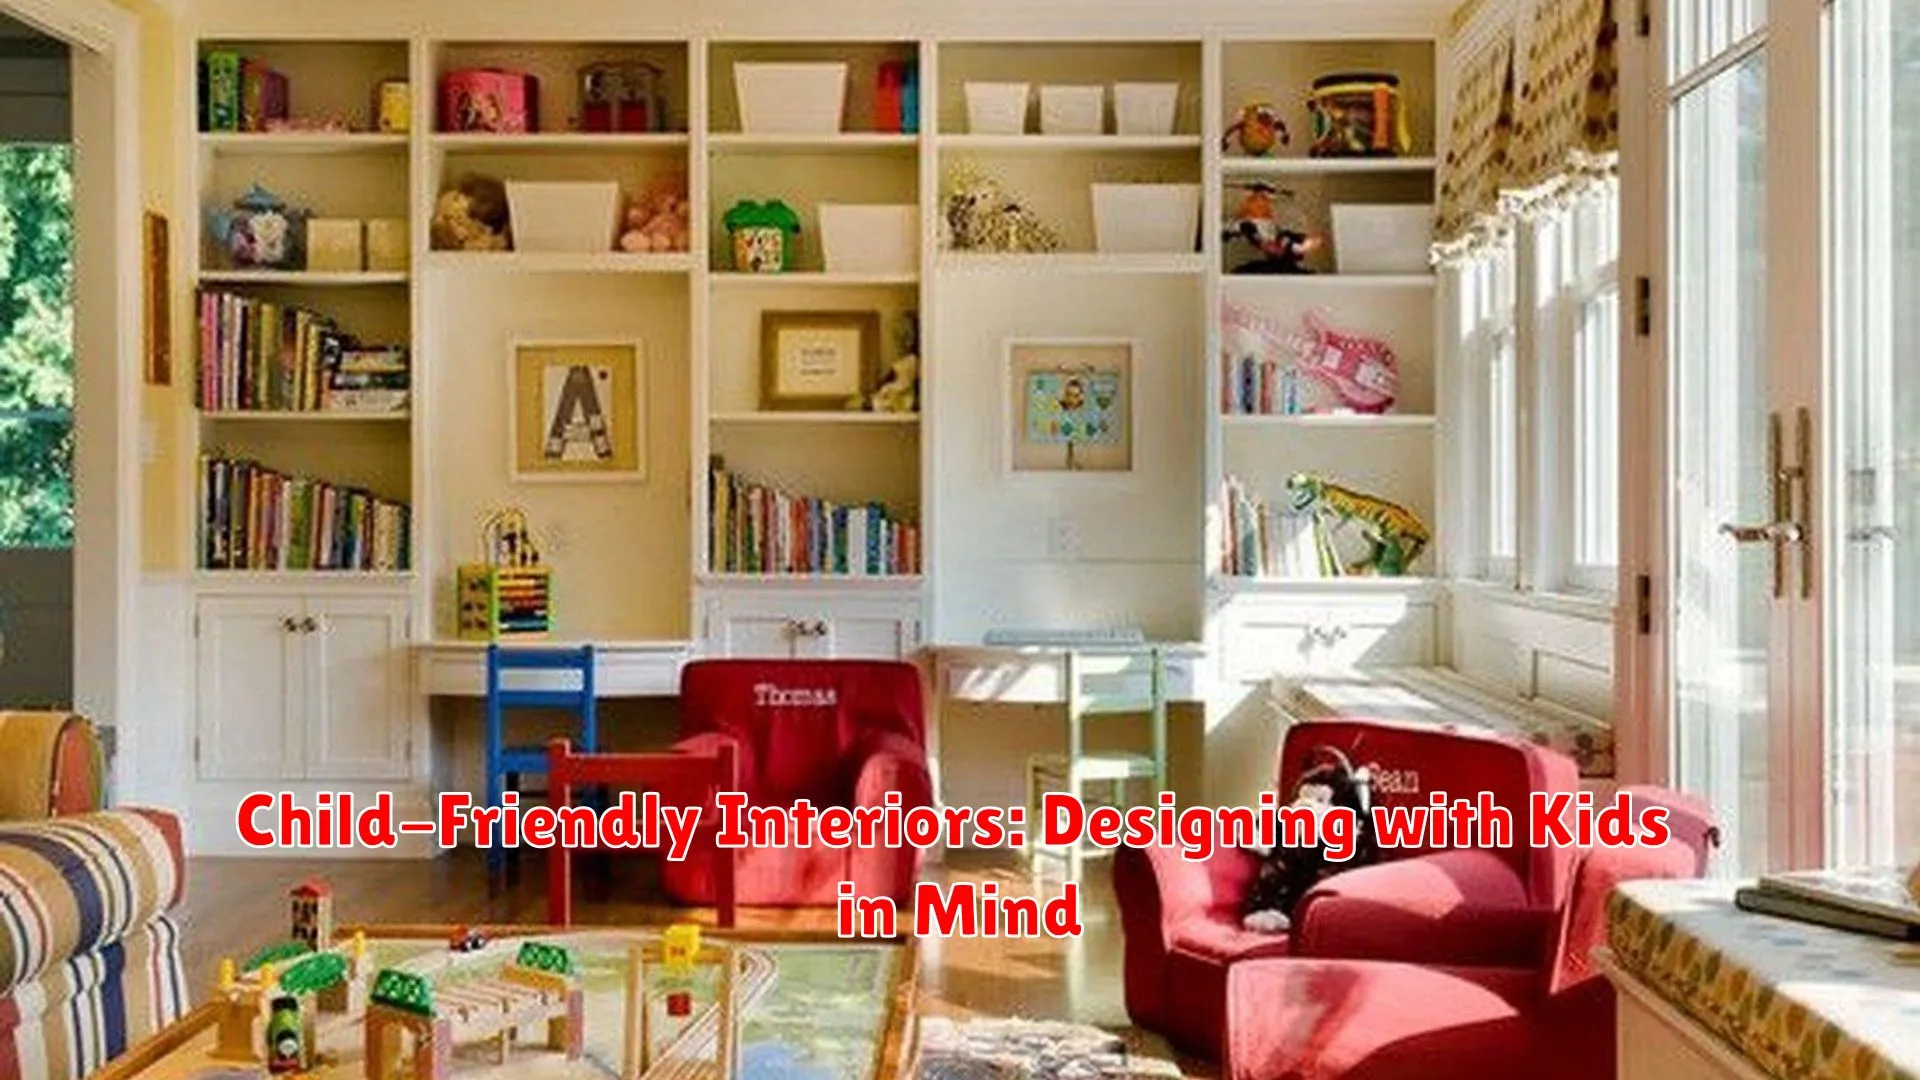 Child-Friendly Interiors: Designing with Kids in Mind